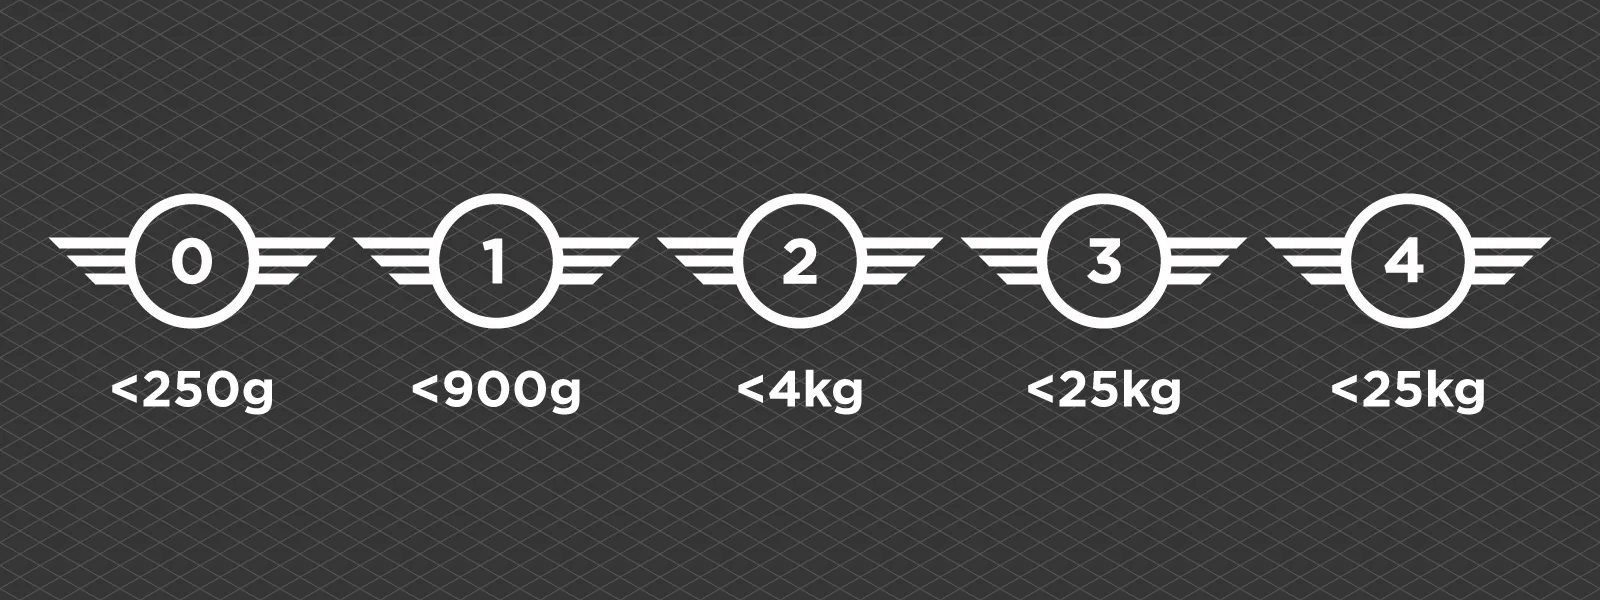 Drone-C-Categories-Weight-Limits